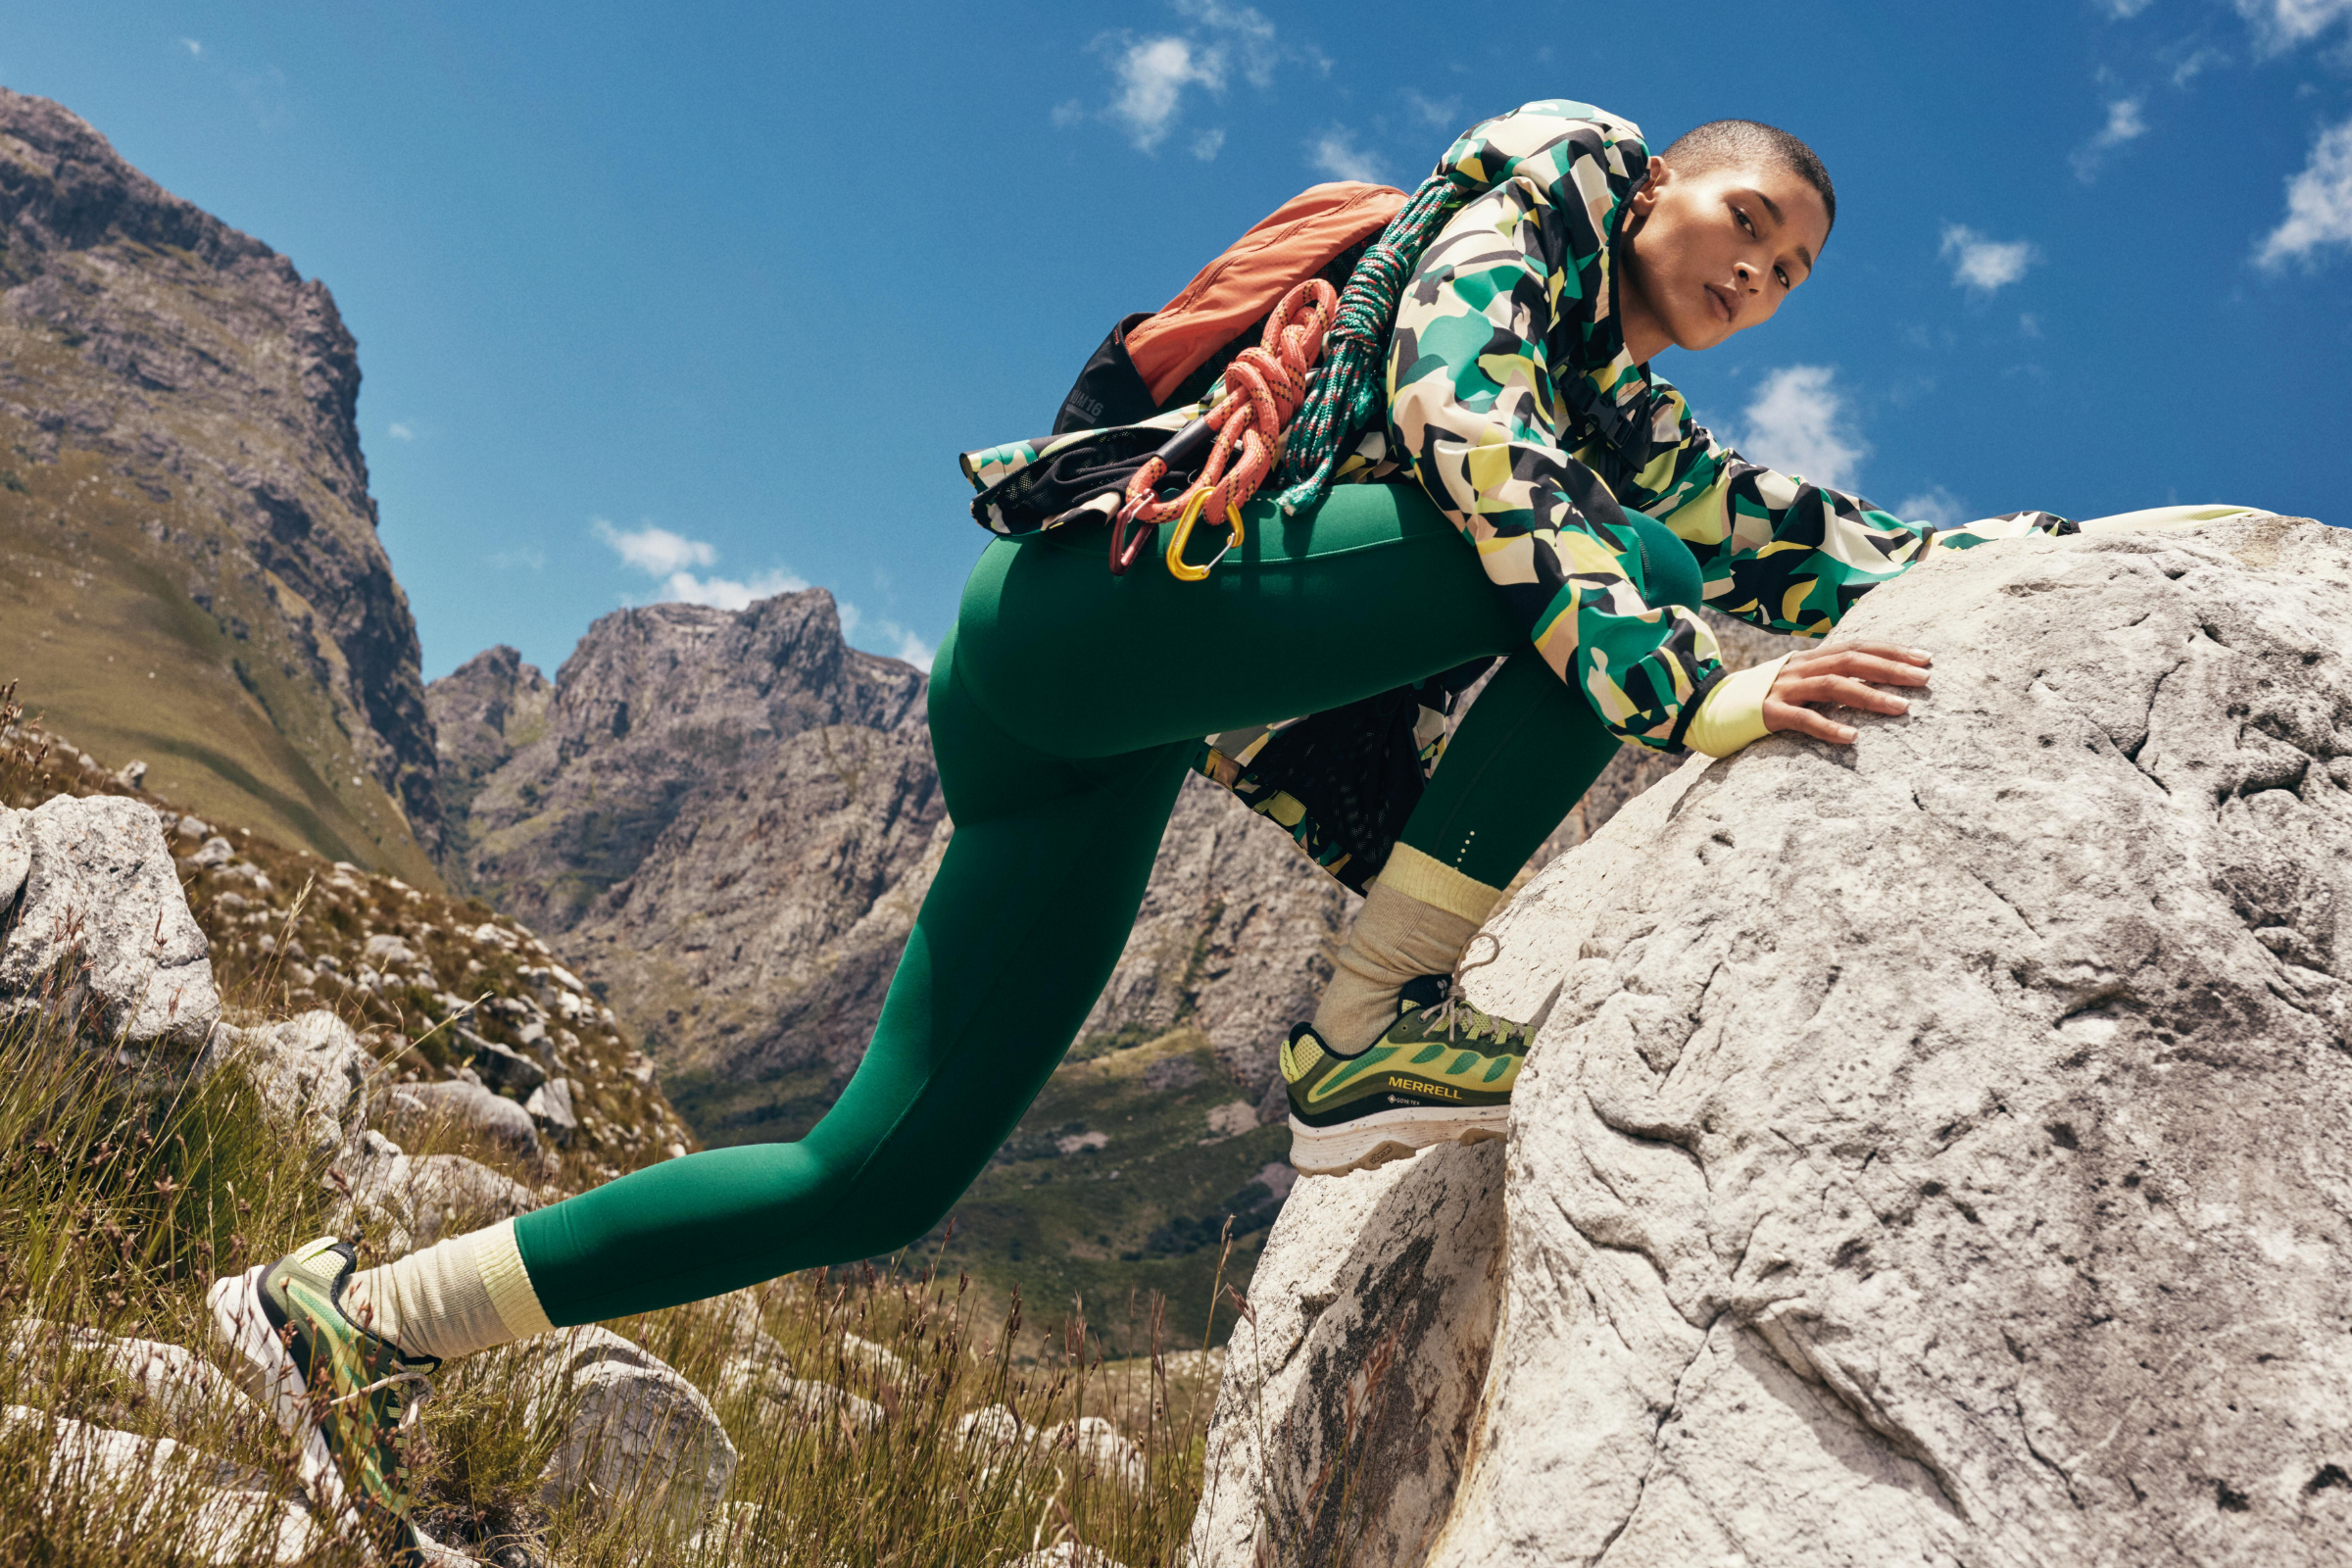 Sweaty Betty makes hike gear & teams up with Merrell for the shoes